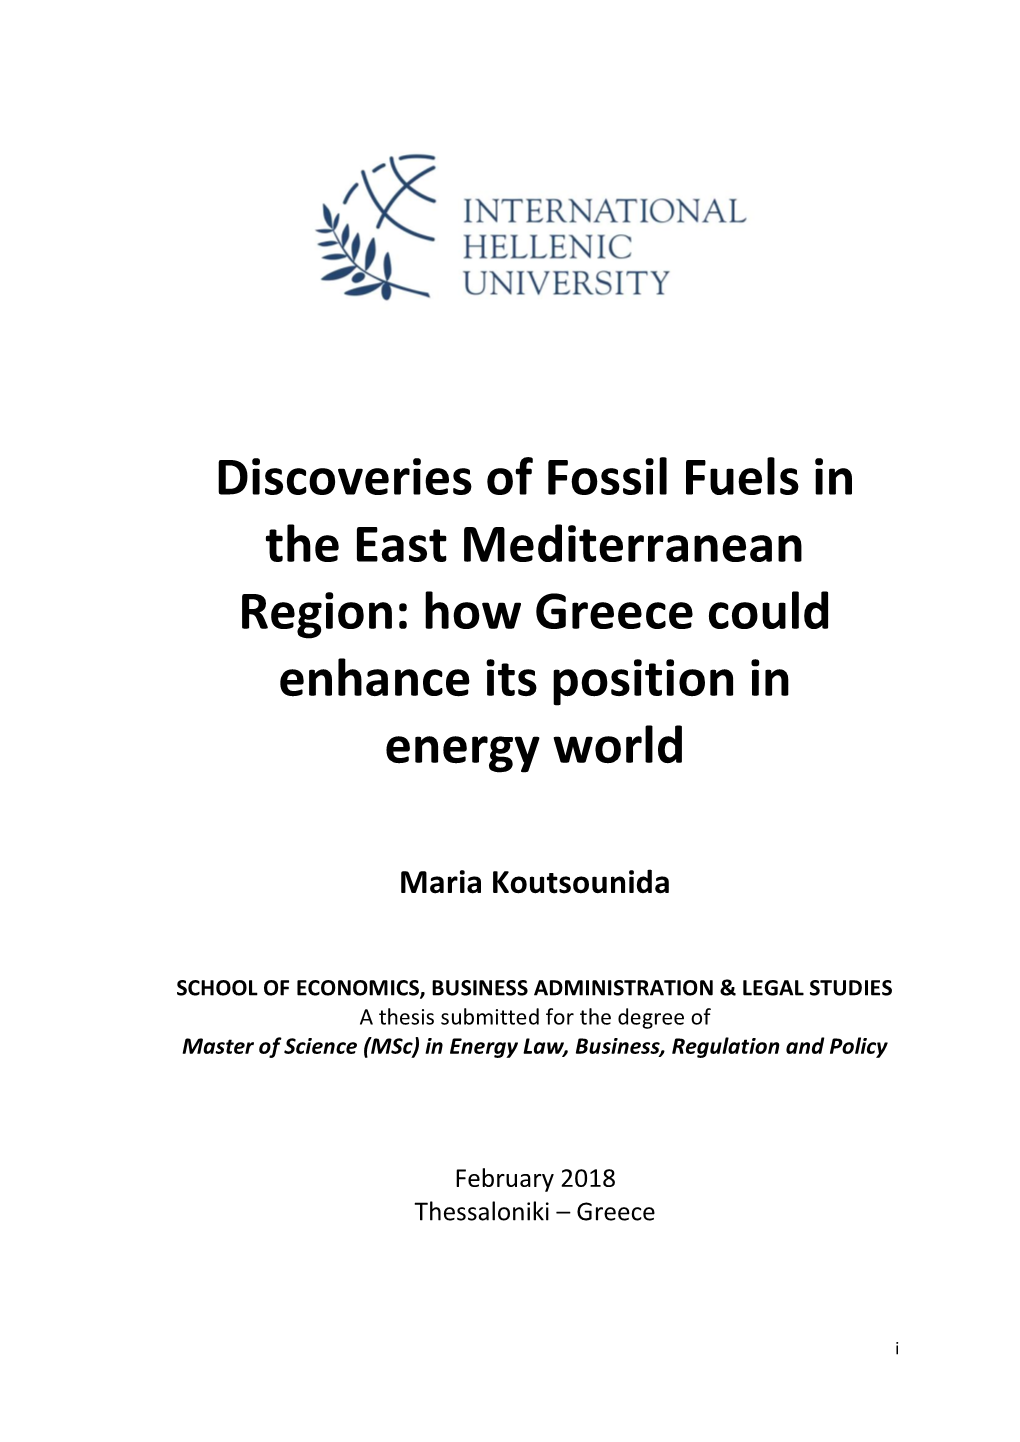 Discoveries of Fossil Fuels in the East Mediterranean Region: How Greece Could Enhance Its Position in Energy World